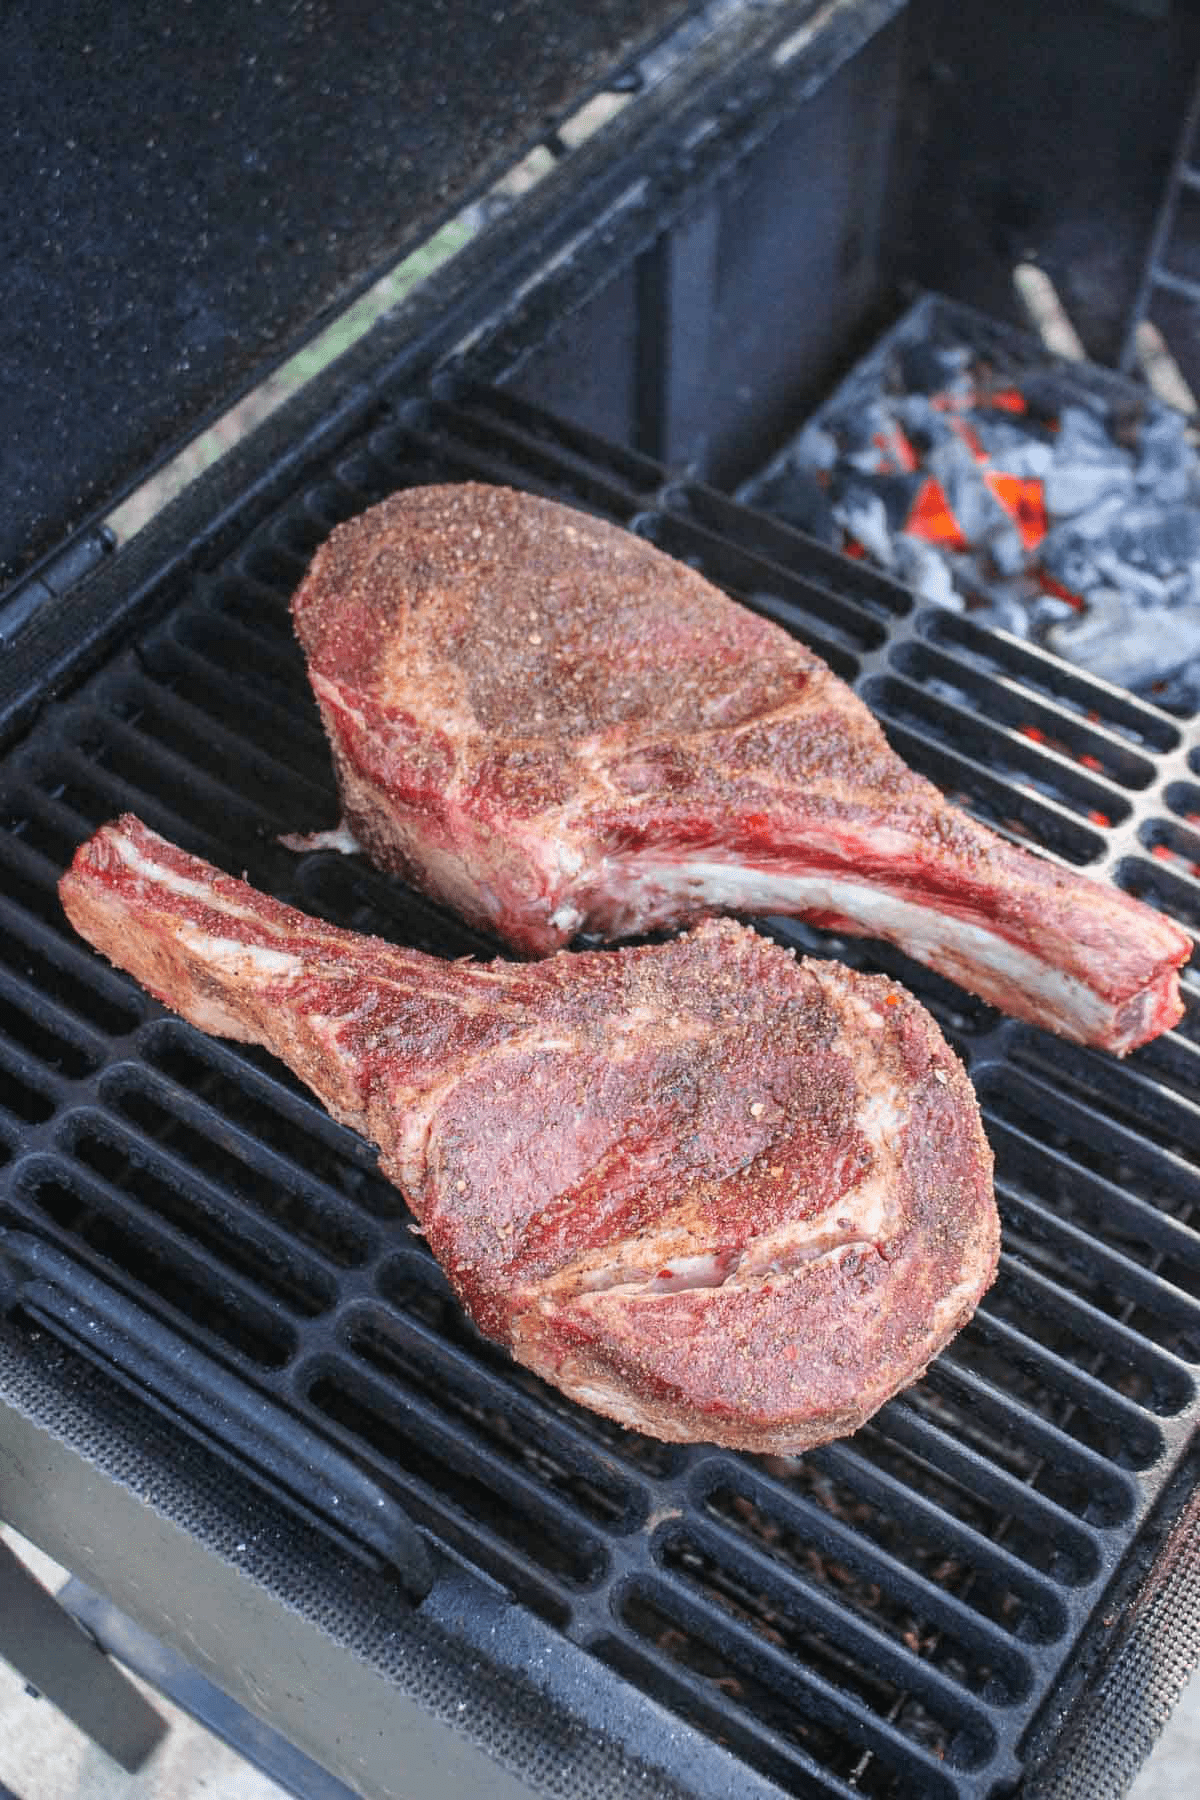 Grilled ribeyes on the smoker set up for indirect cooking.